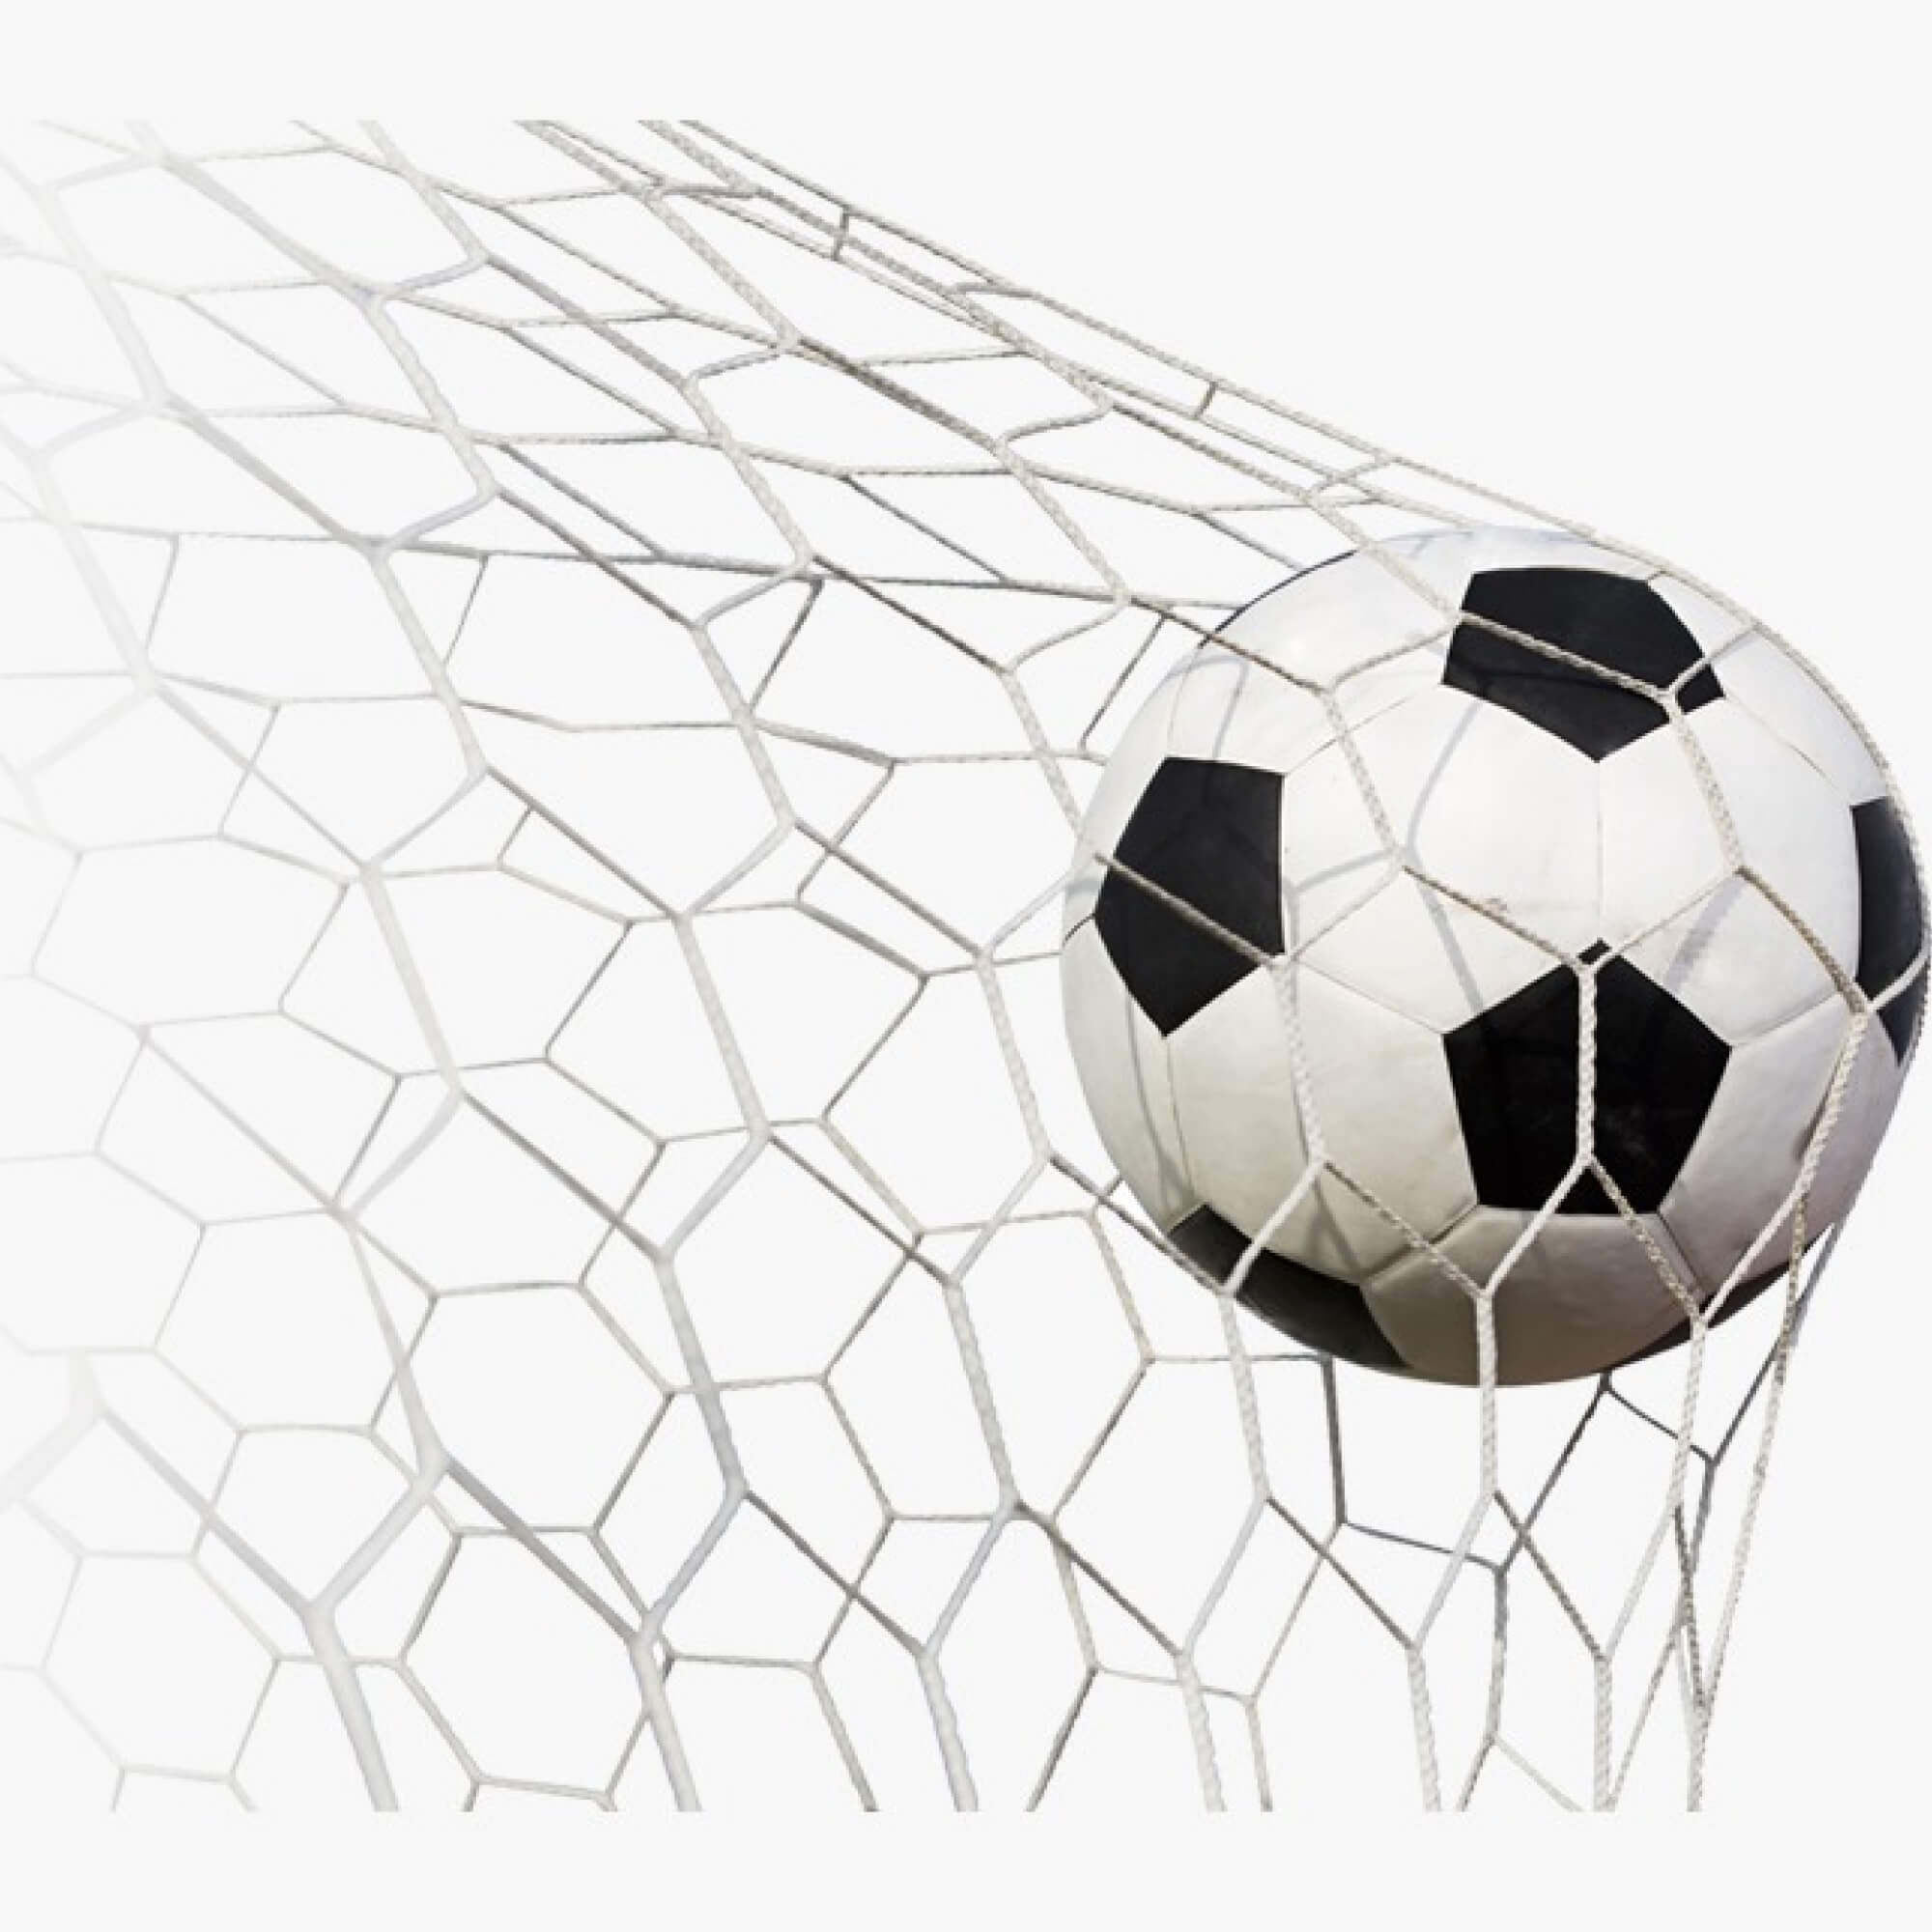 singlesourcesupply.ca-Soccer netting